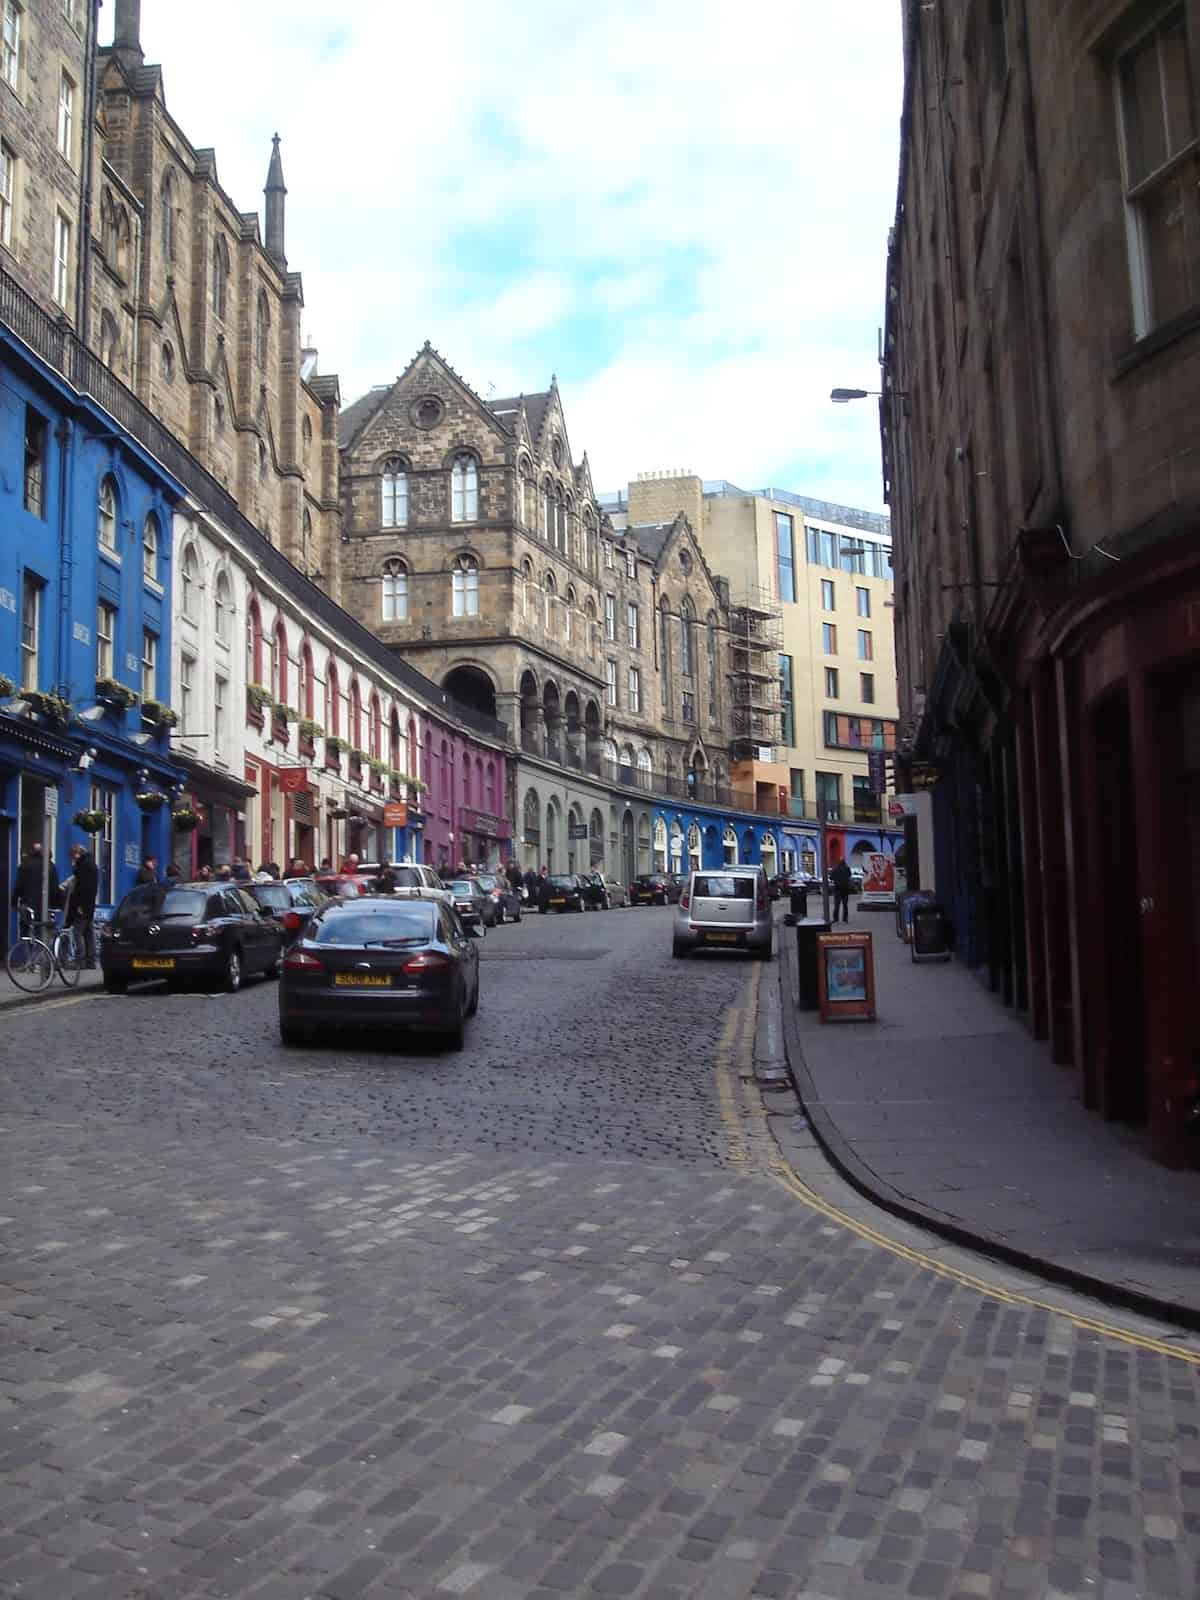 The curving Victoria Street